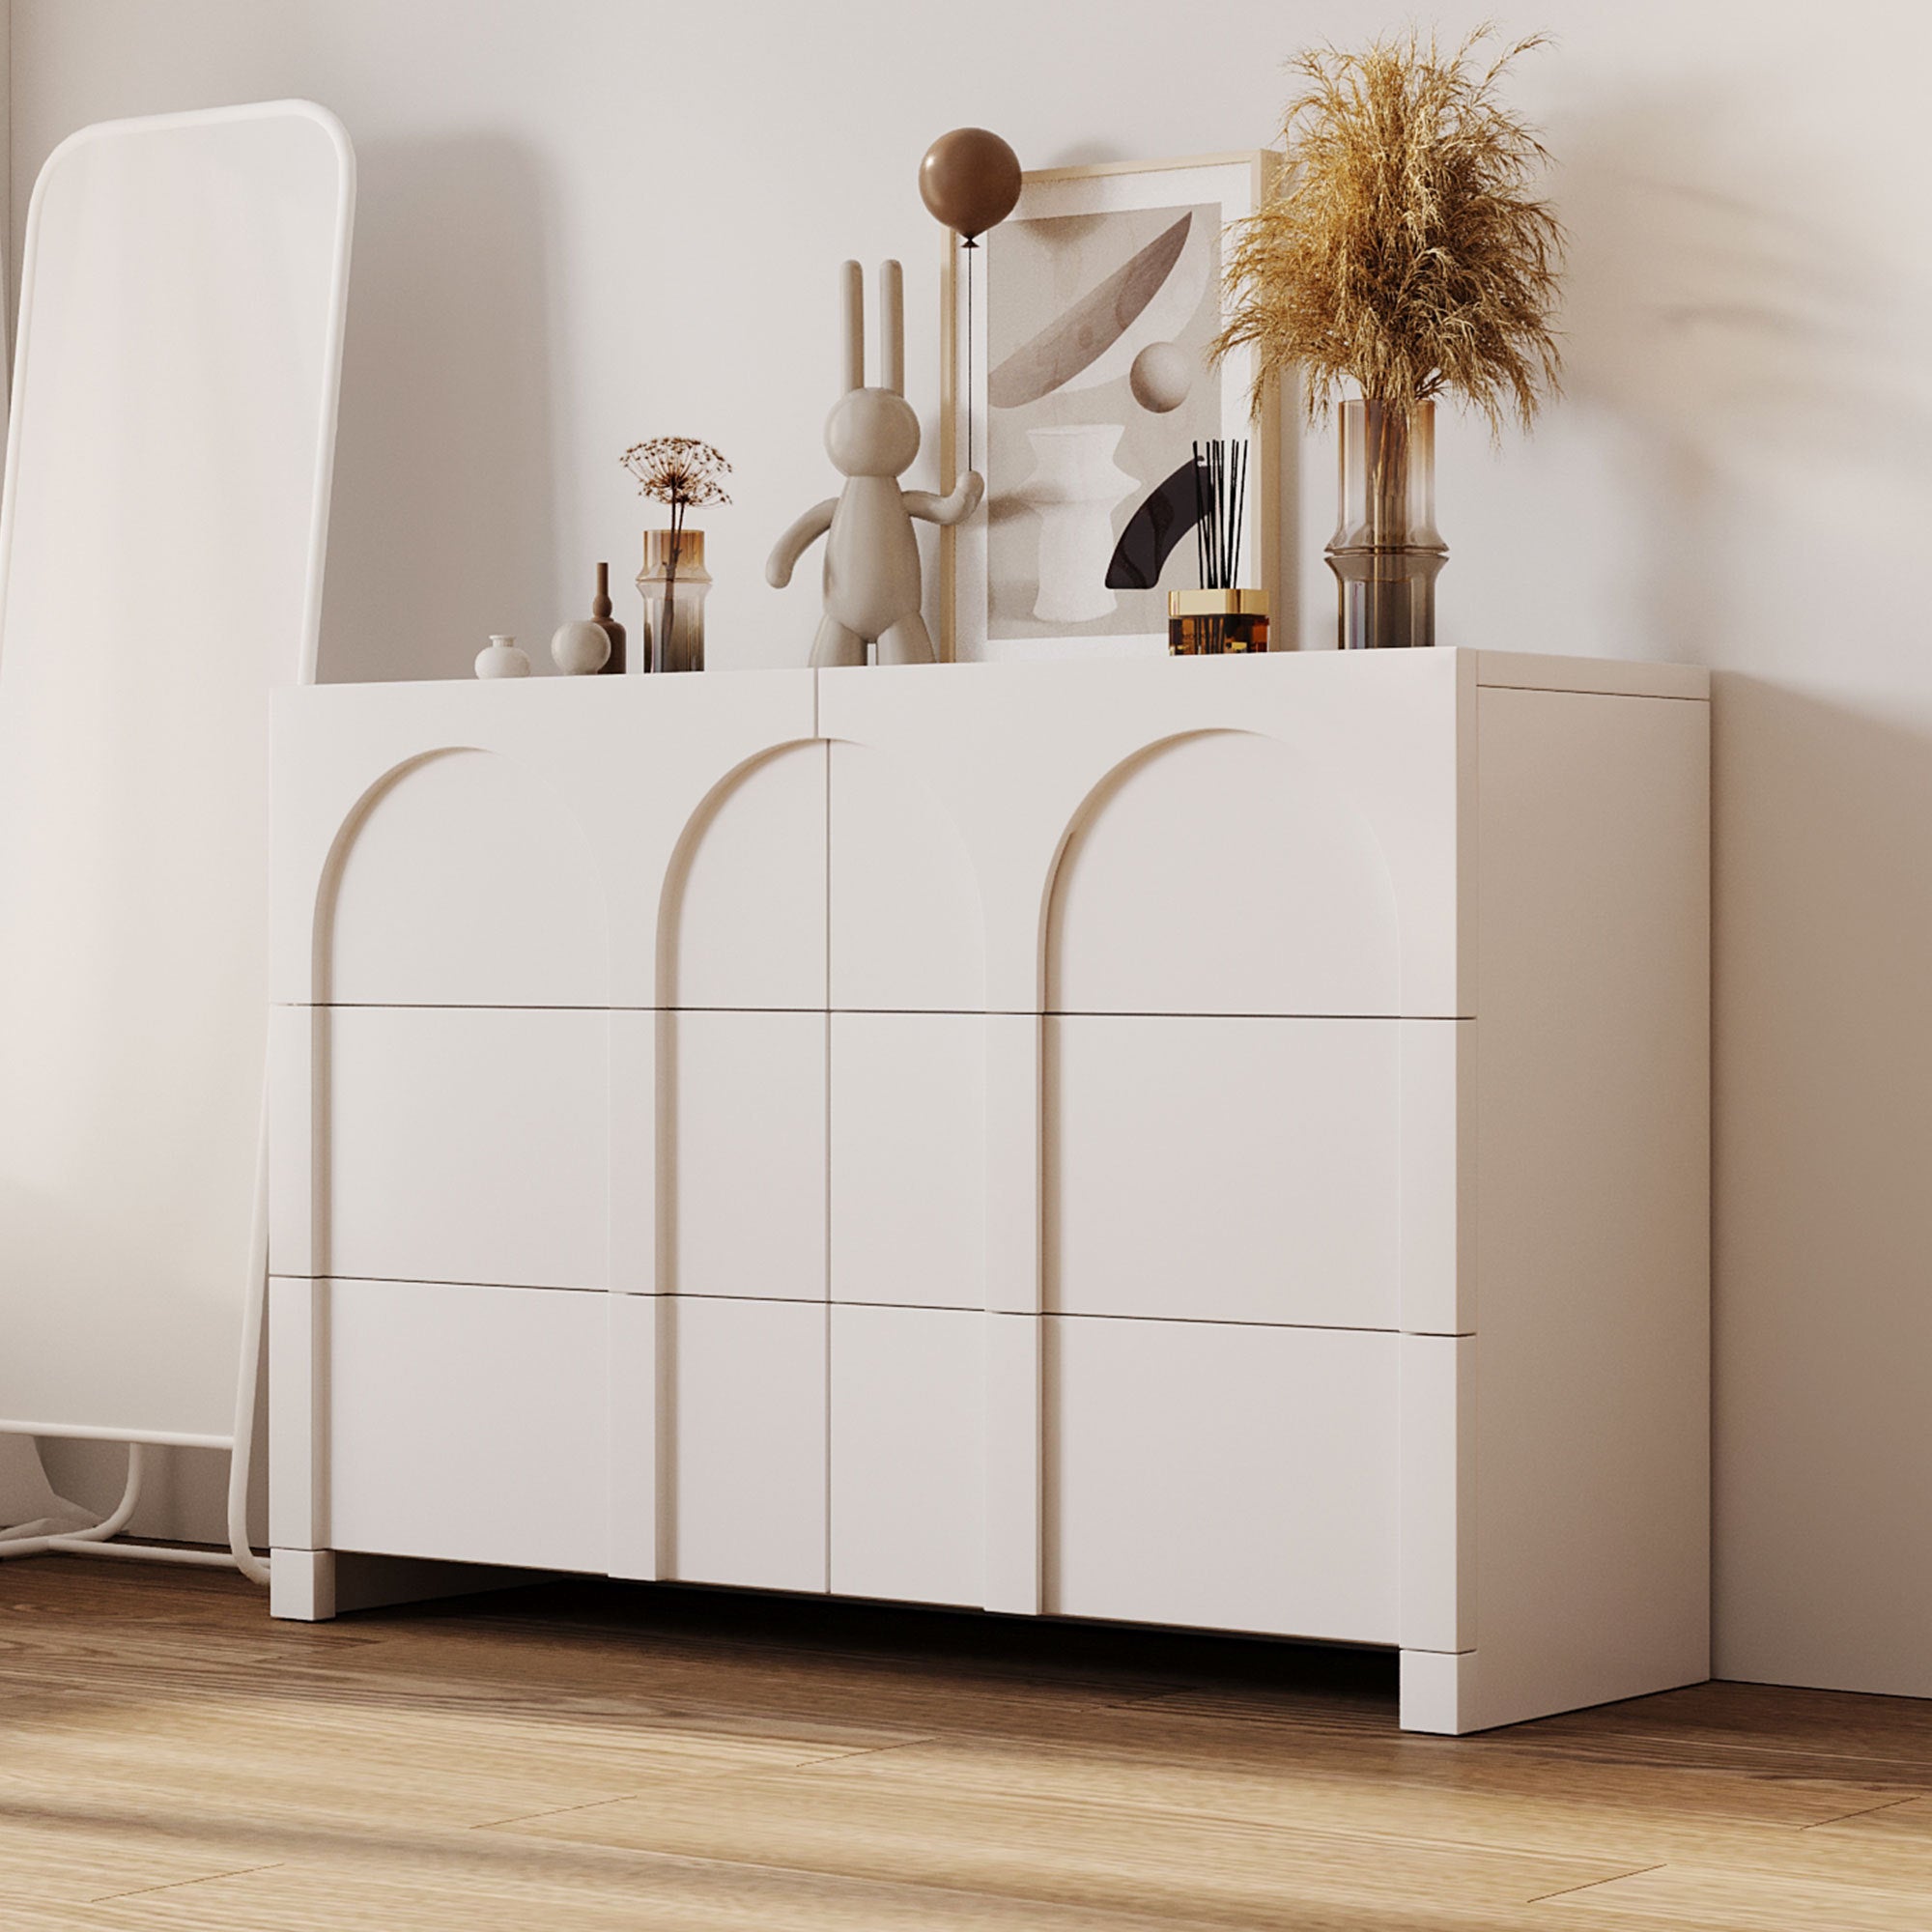 Modern Style Six-Drawer Dresser Sideboard Cabinet Ample Storage Spaces - Half Gloss White